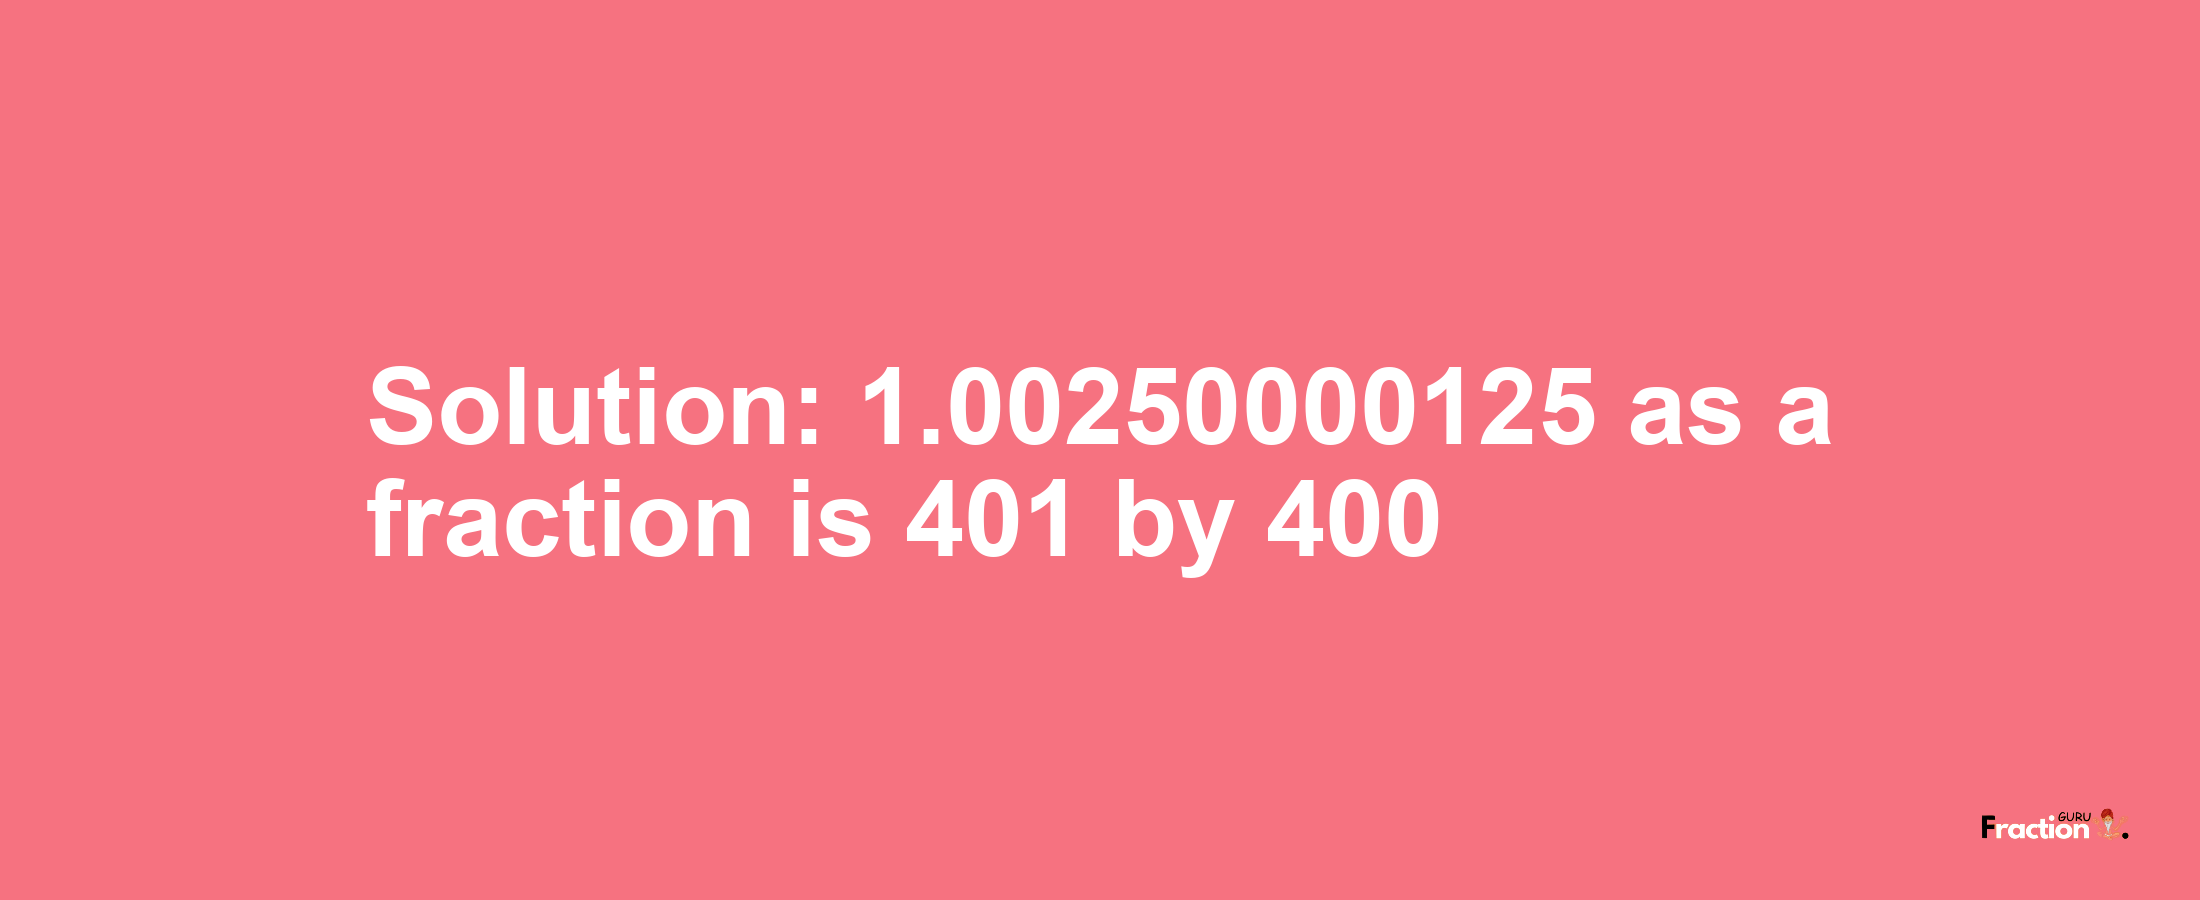 Solution:1.00250000125 as a fraction is 401/400